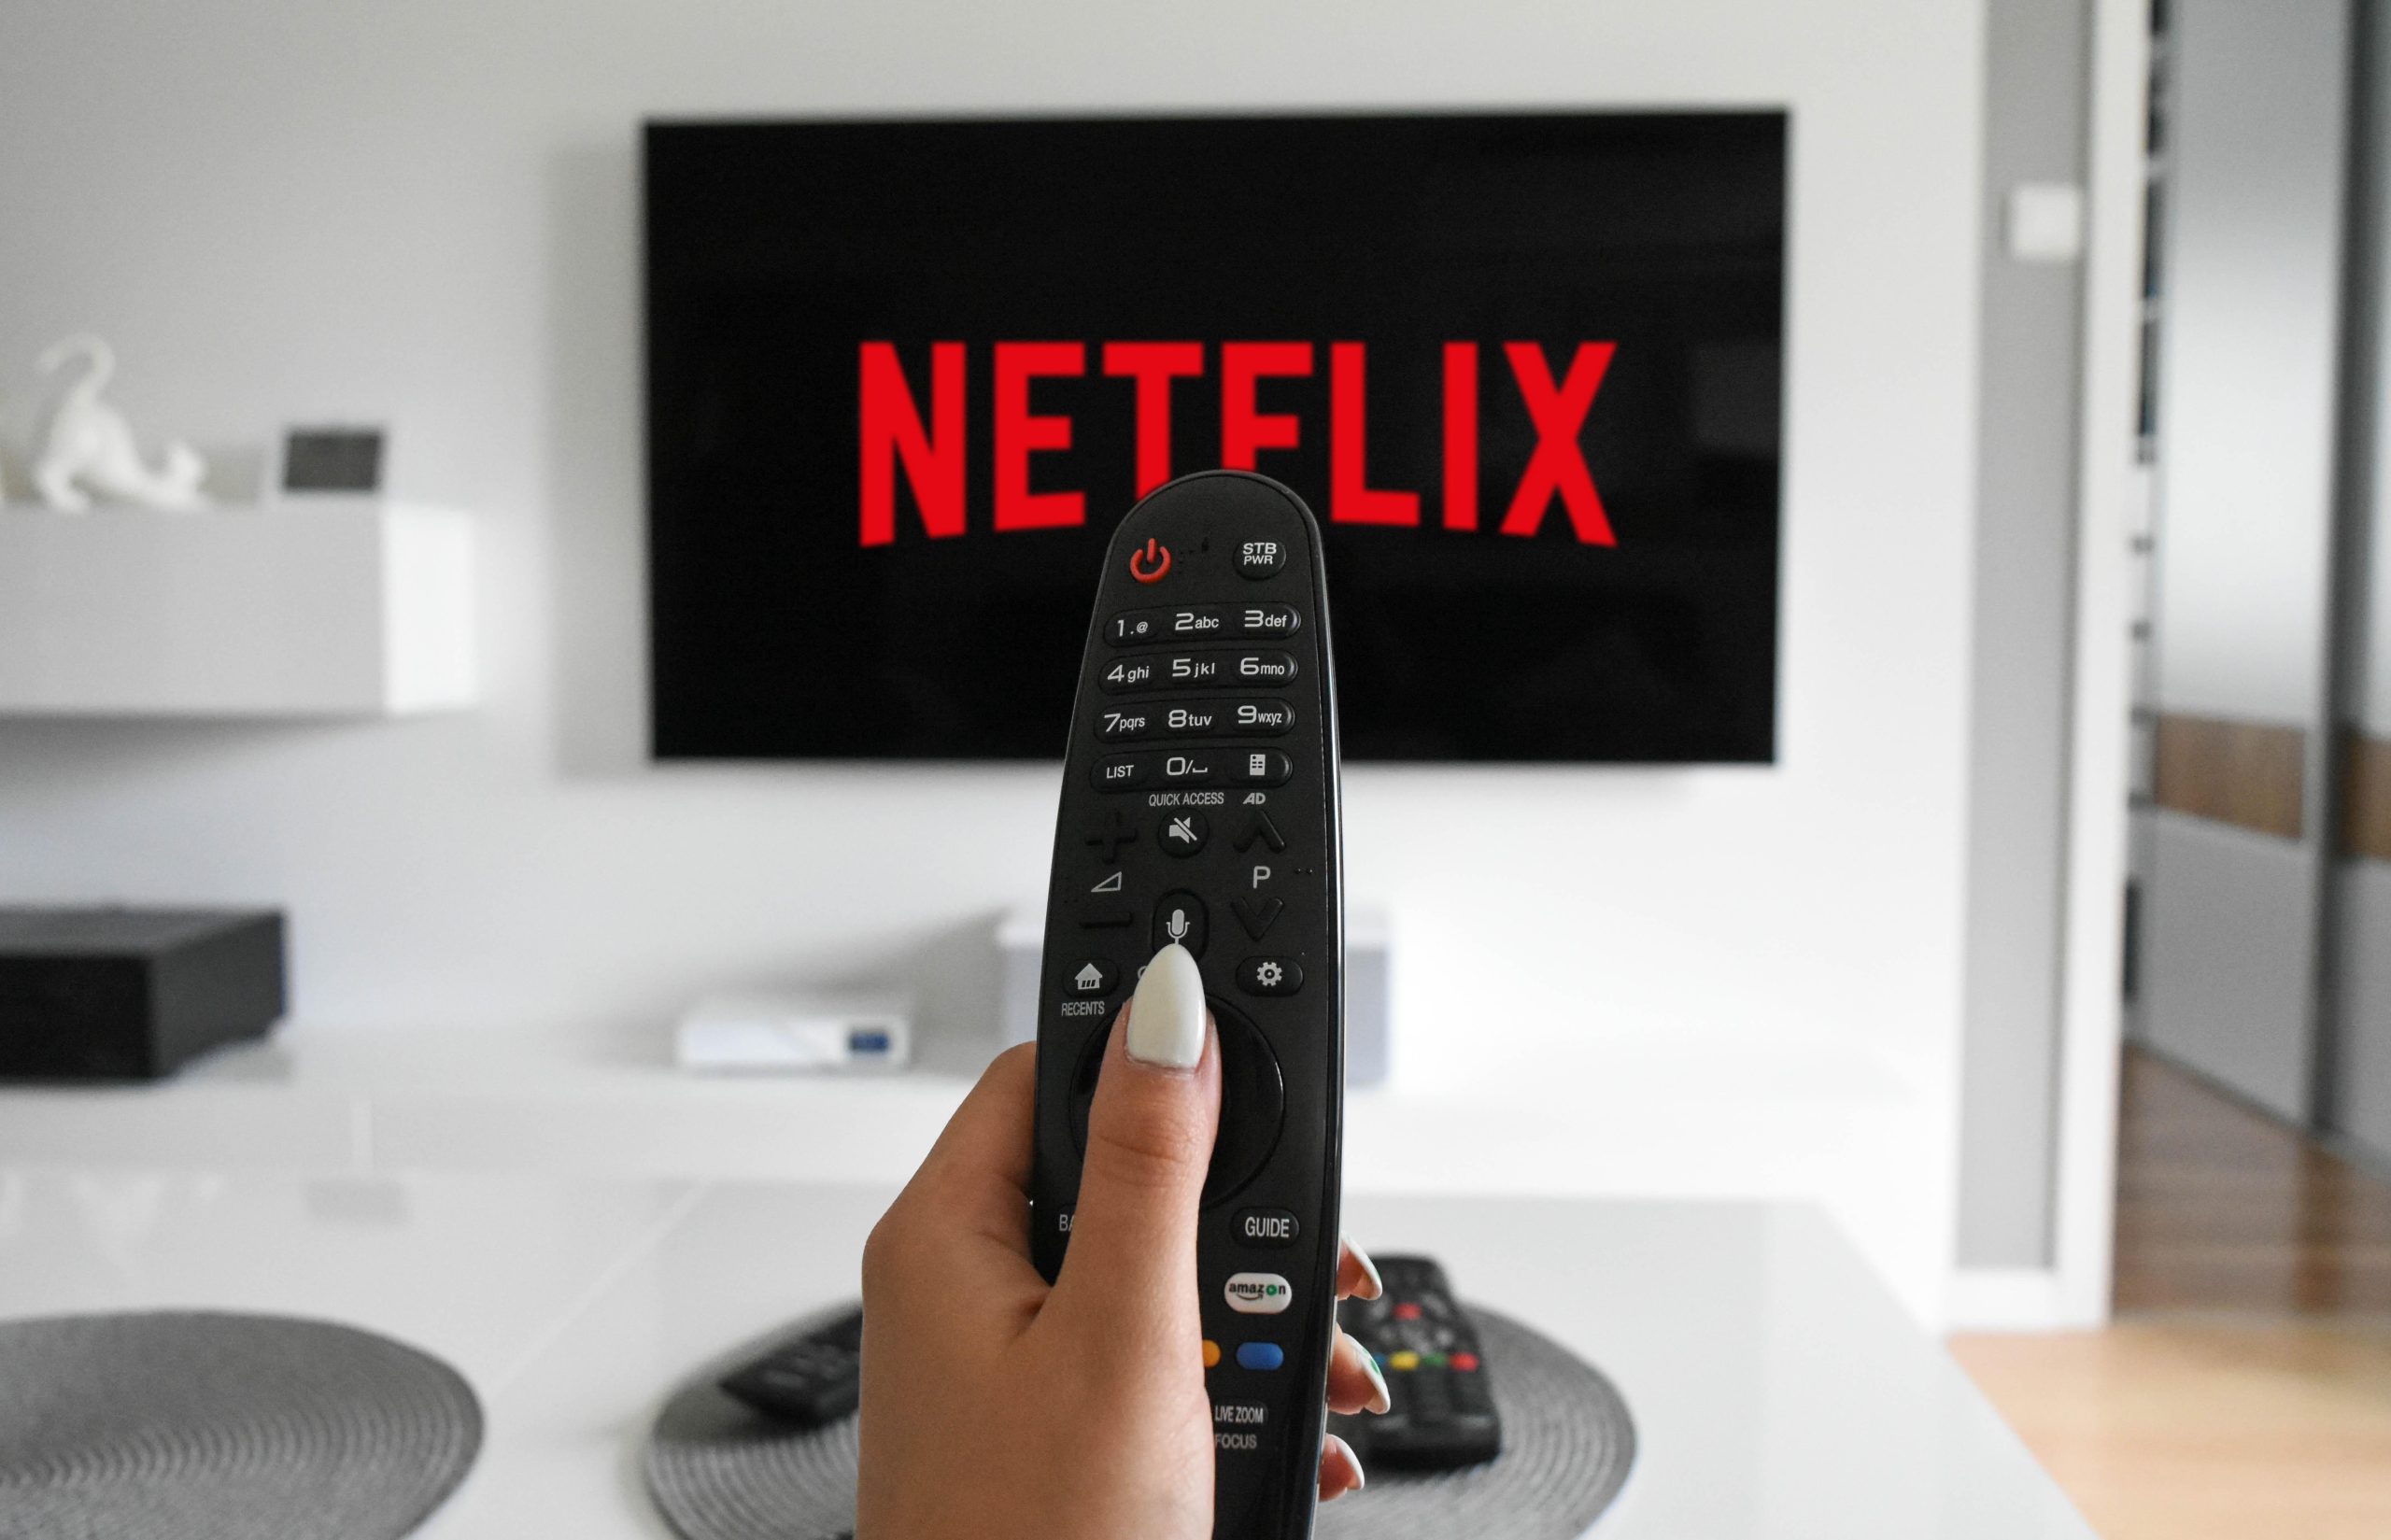 Netflix sheds 1.6million users in Spain in just a few months after cracking down on password sharing: Main rival now boasts more subscribers